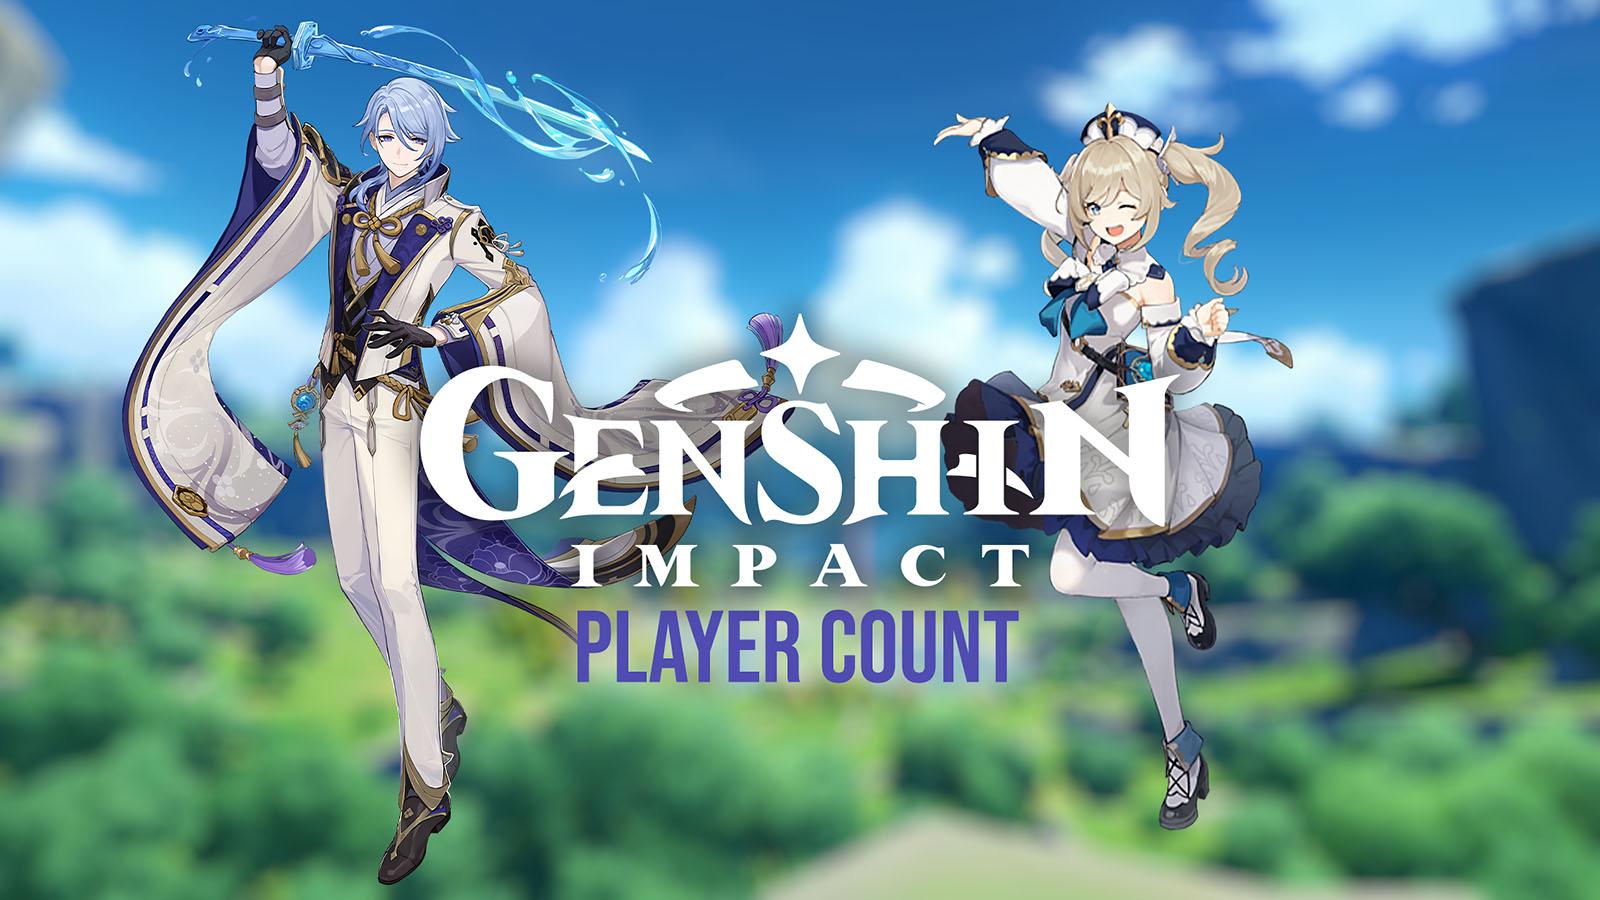 The Genshin Impact logo on a background of Teyvat with the word player count underneath with Barbara and Ayato